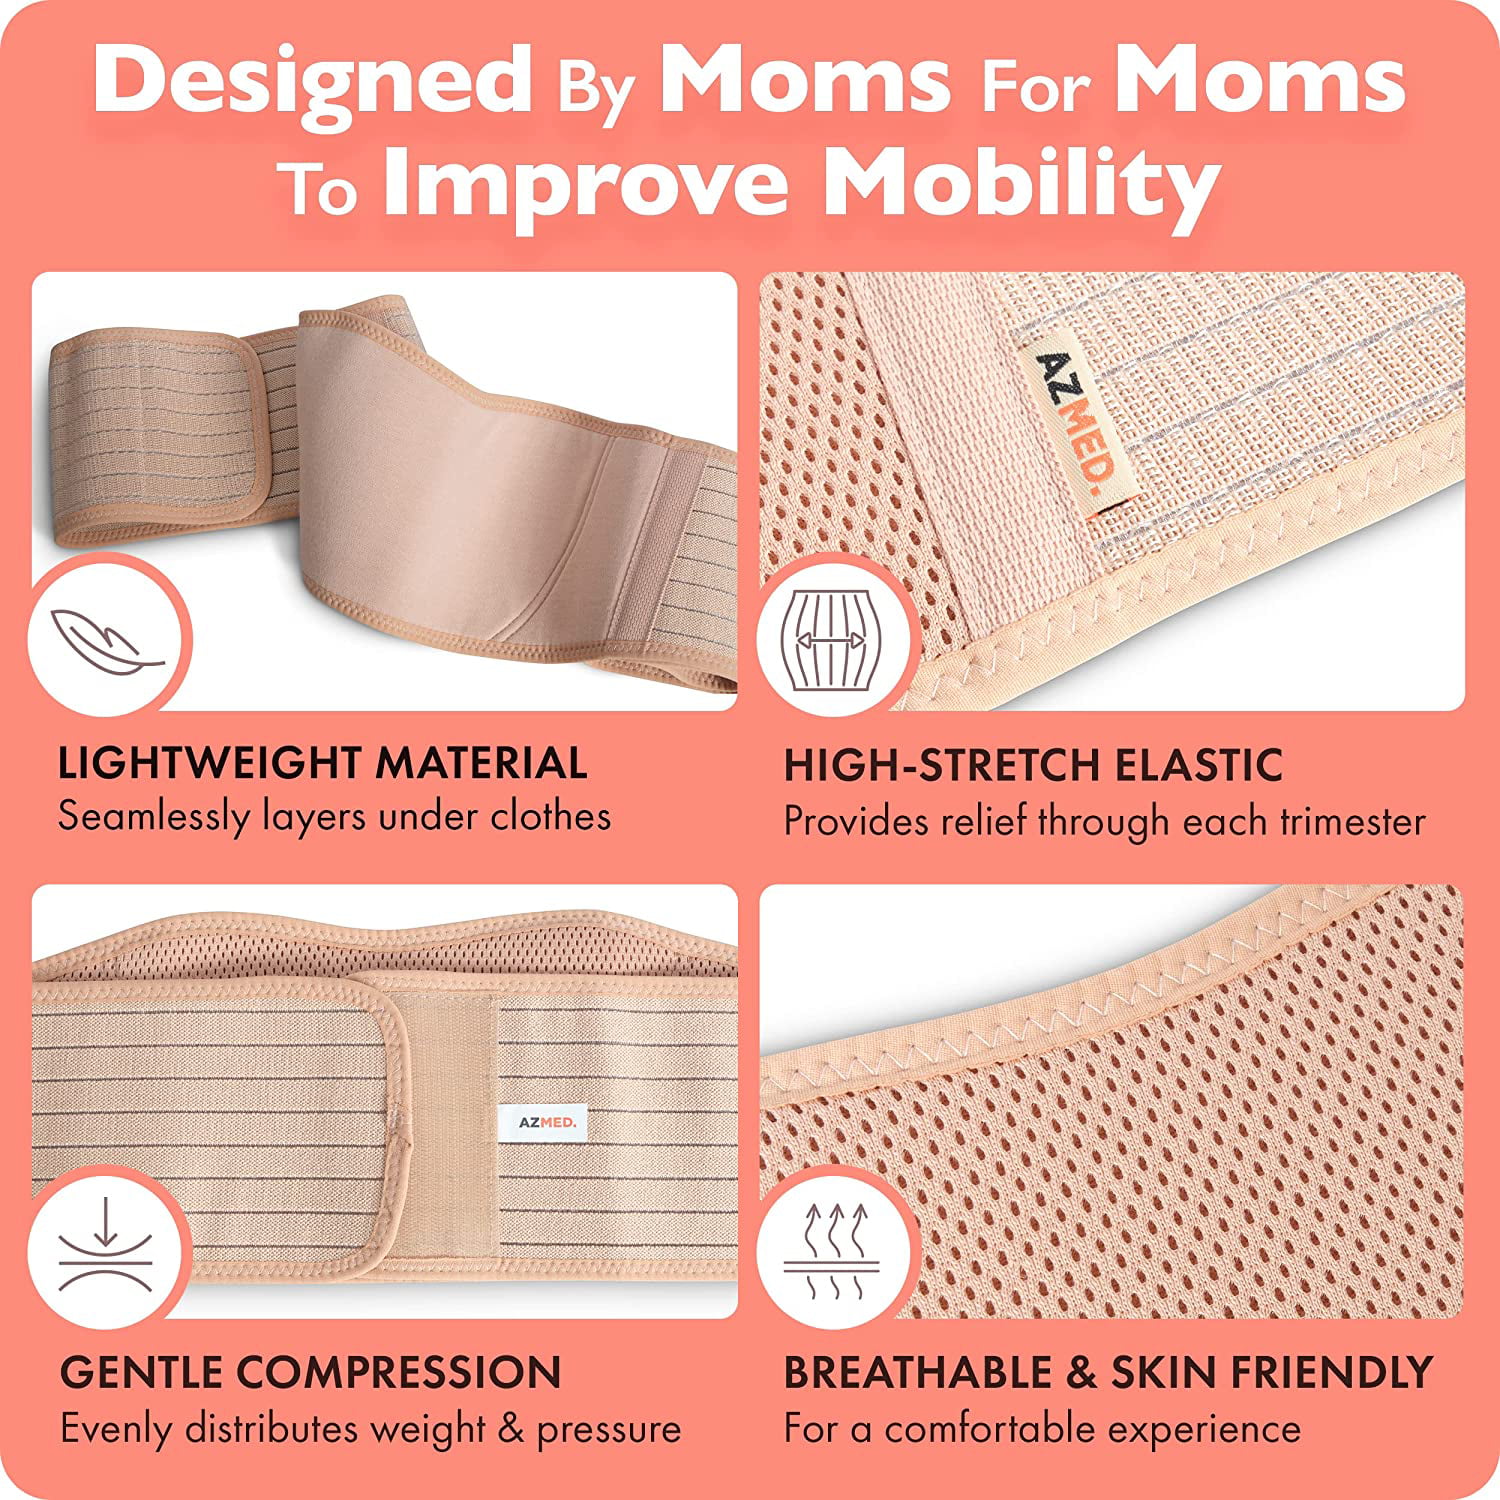 Abdominal Belt for New Moms: What is it, Use, and Benefits